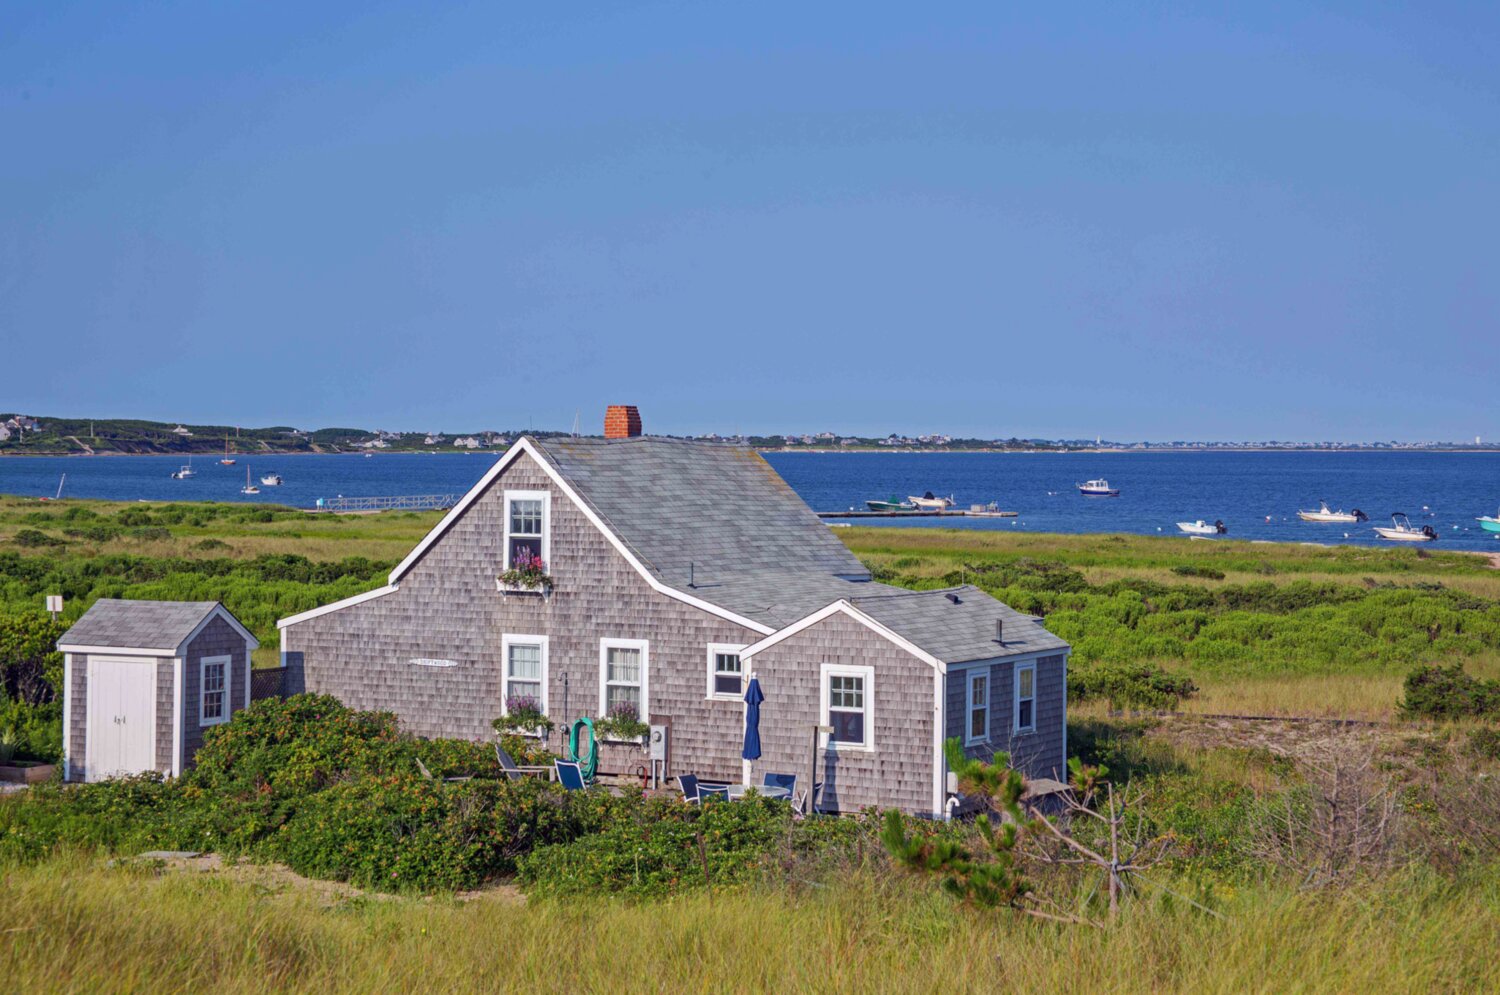 Nestled in the tranquil and picturesque area of Wauwinet on 1.2 acres of land, this quaint beach house provides the best a Nantucket summer can offer.